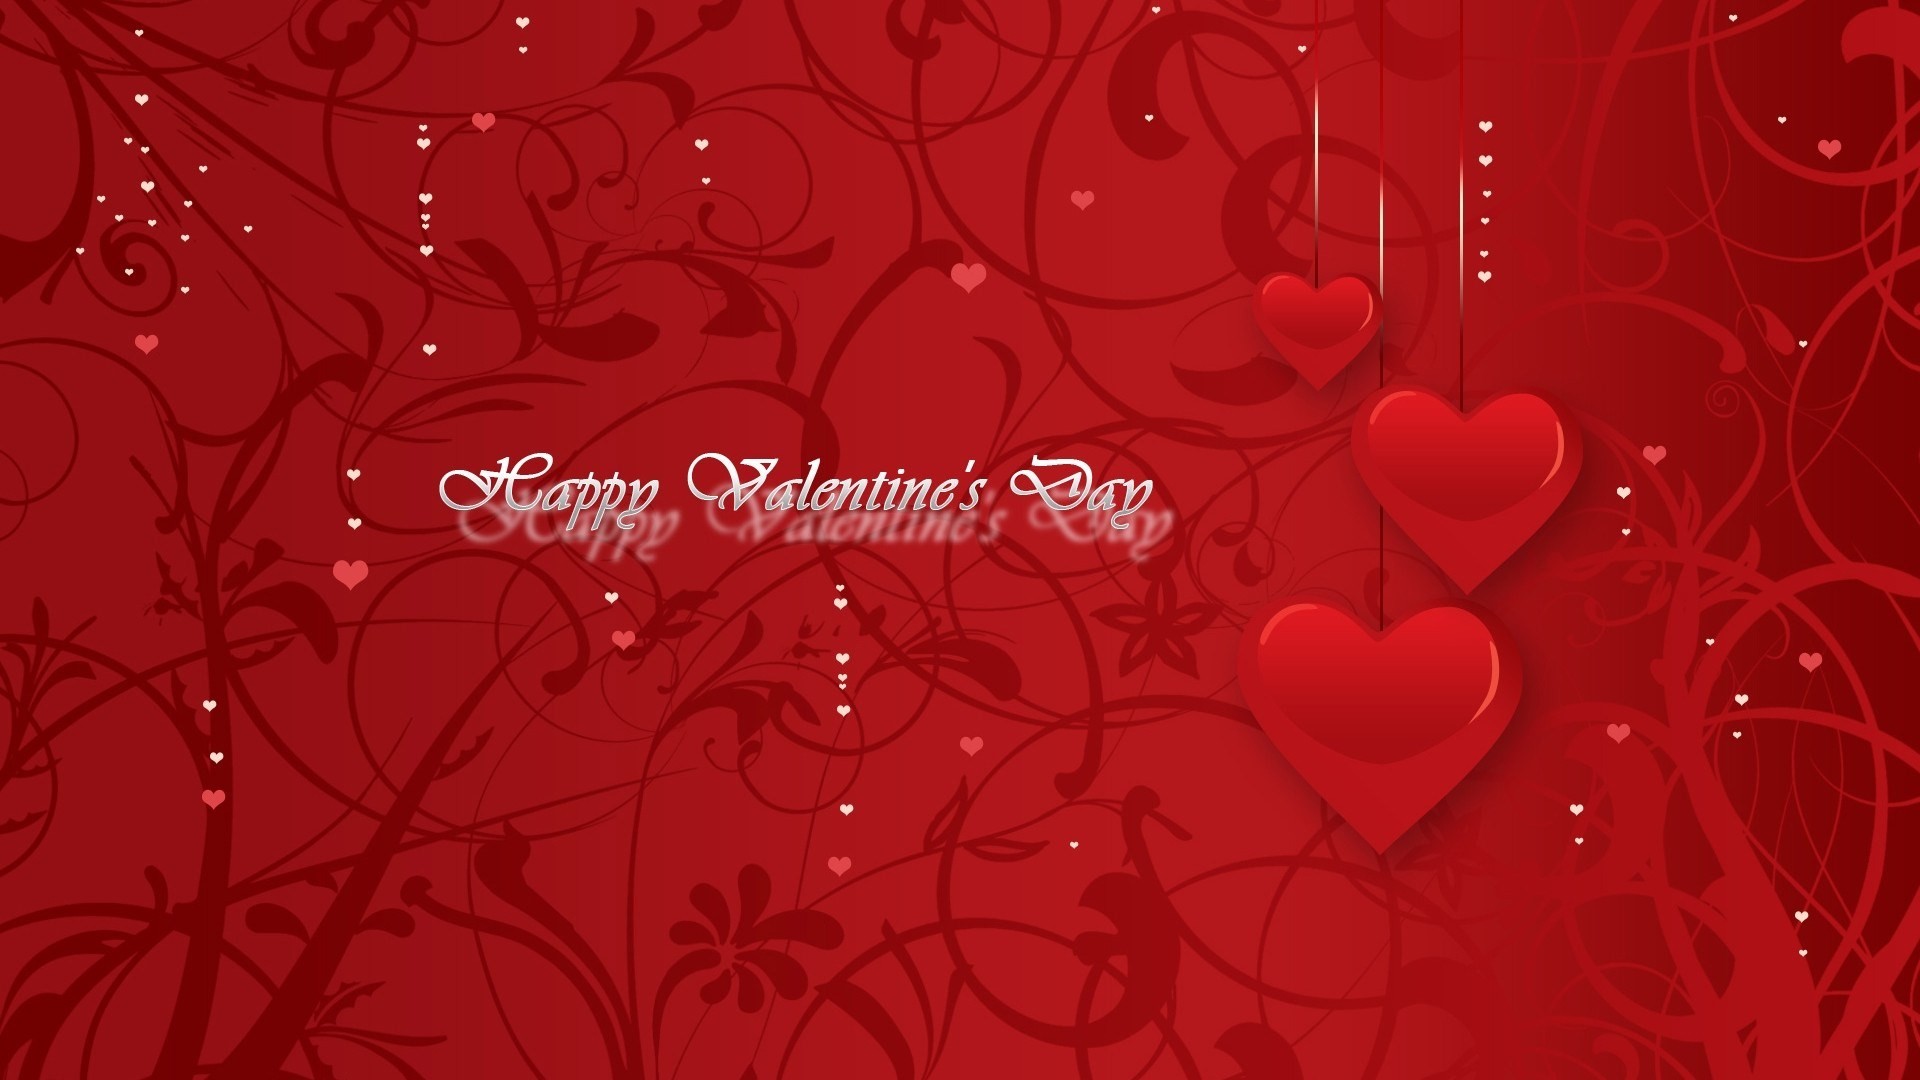 Valentines Day Backgrounds.